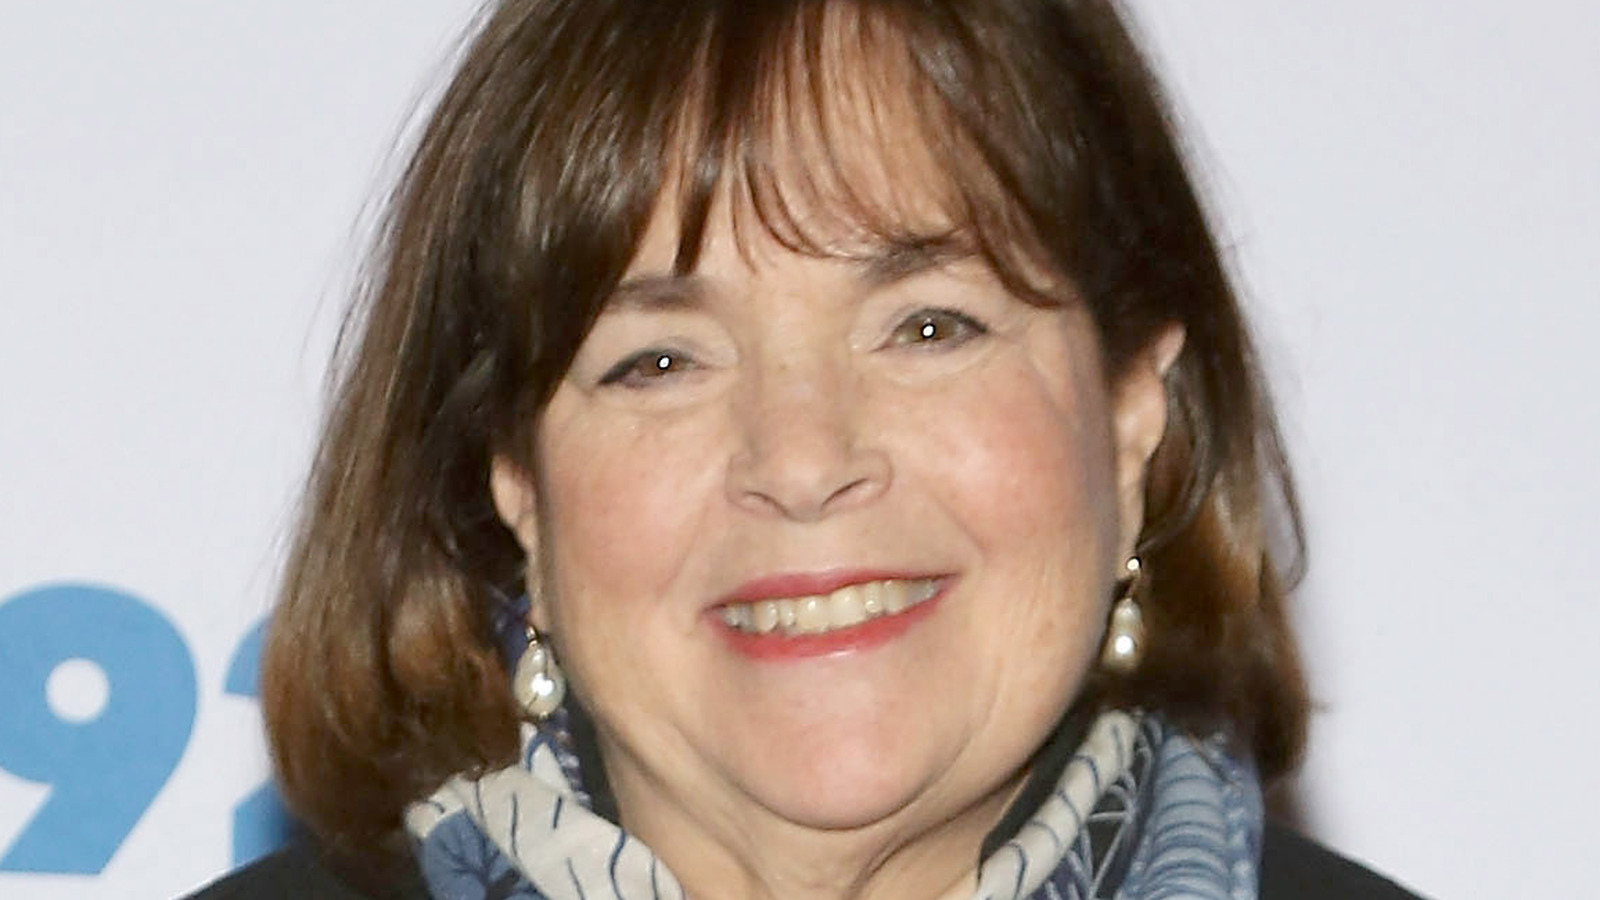 The Egg Size Ina Garten Uses For All Of Her Baking